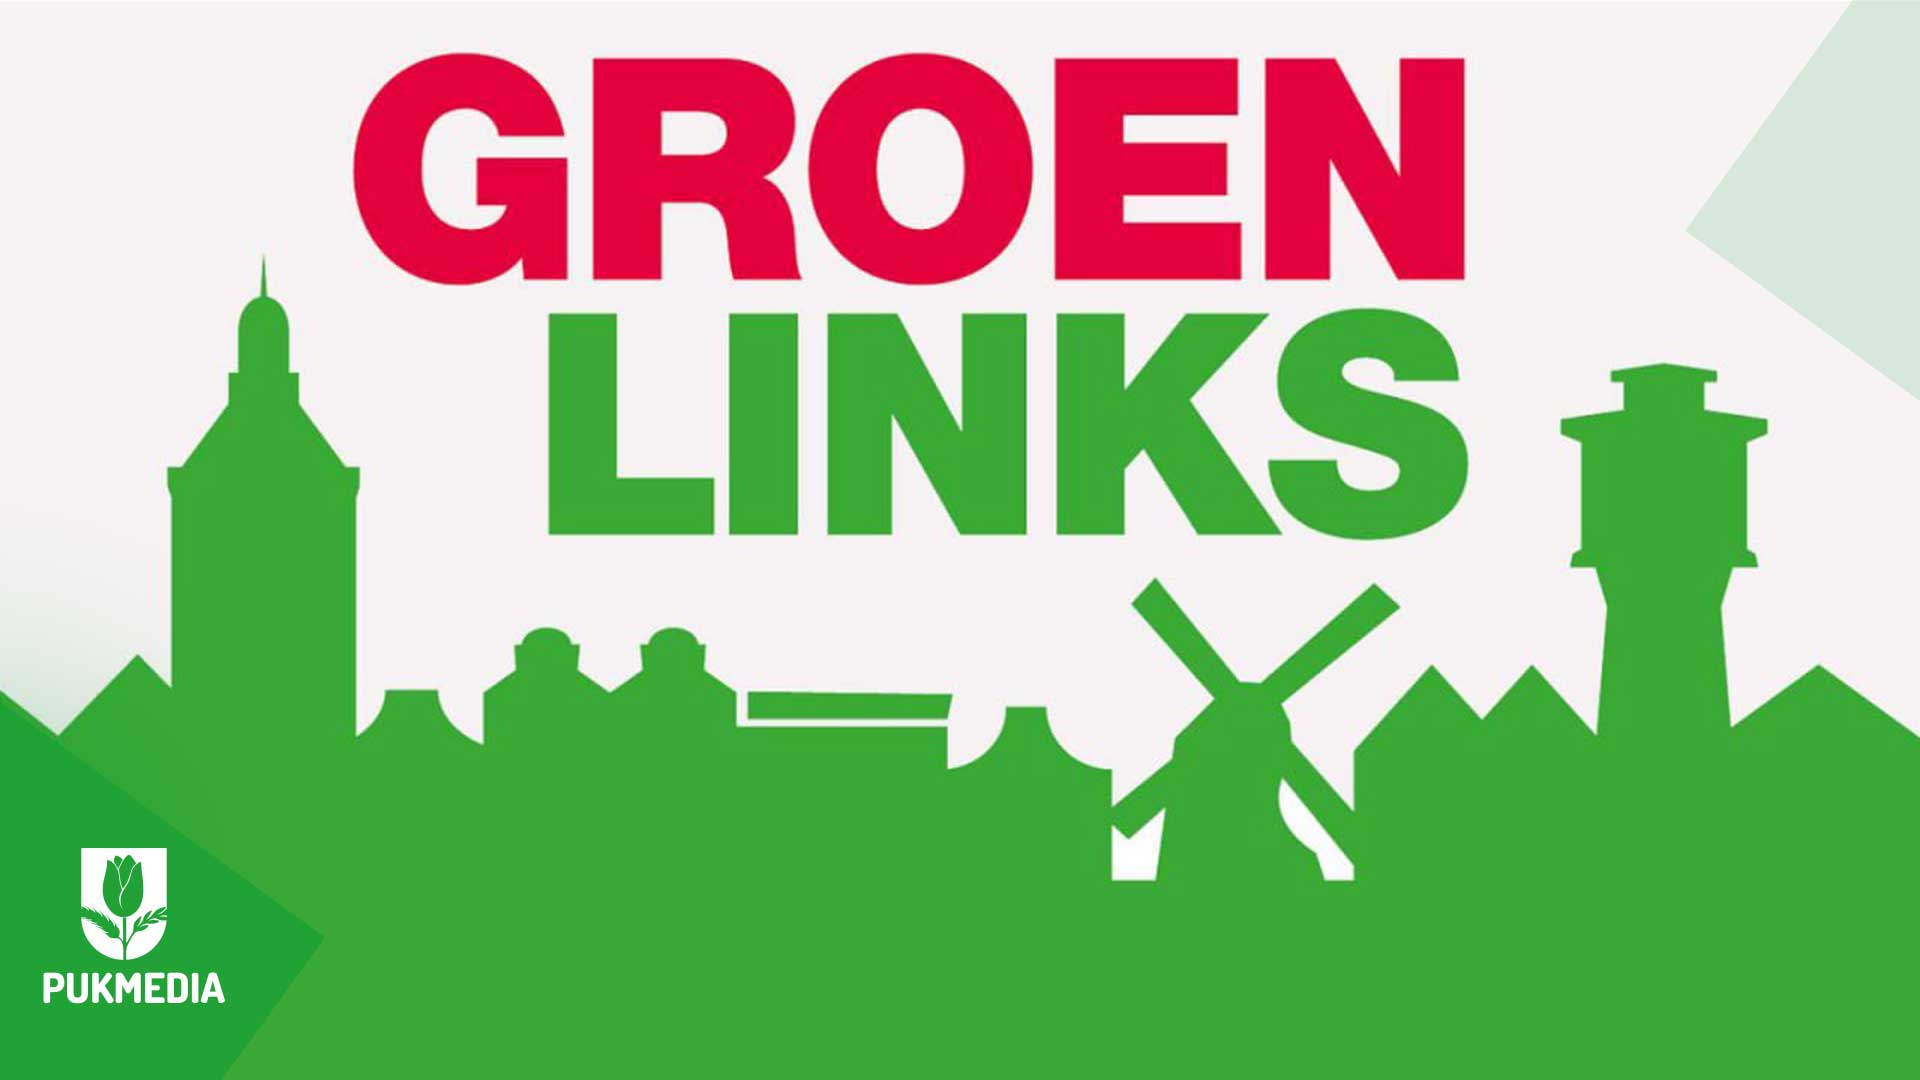  The GroenLinks Party logo